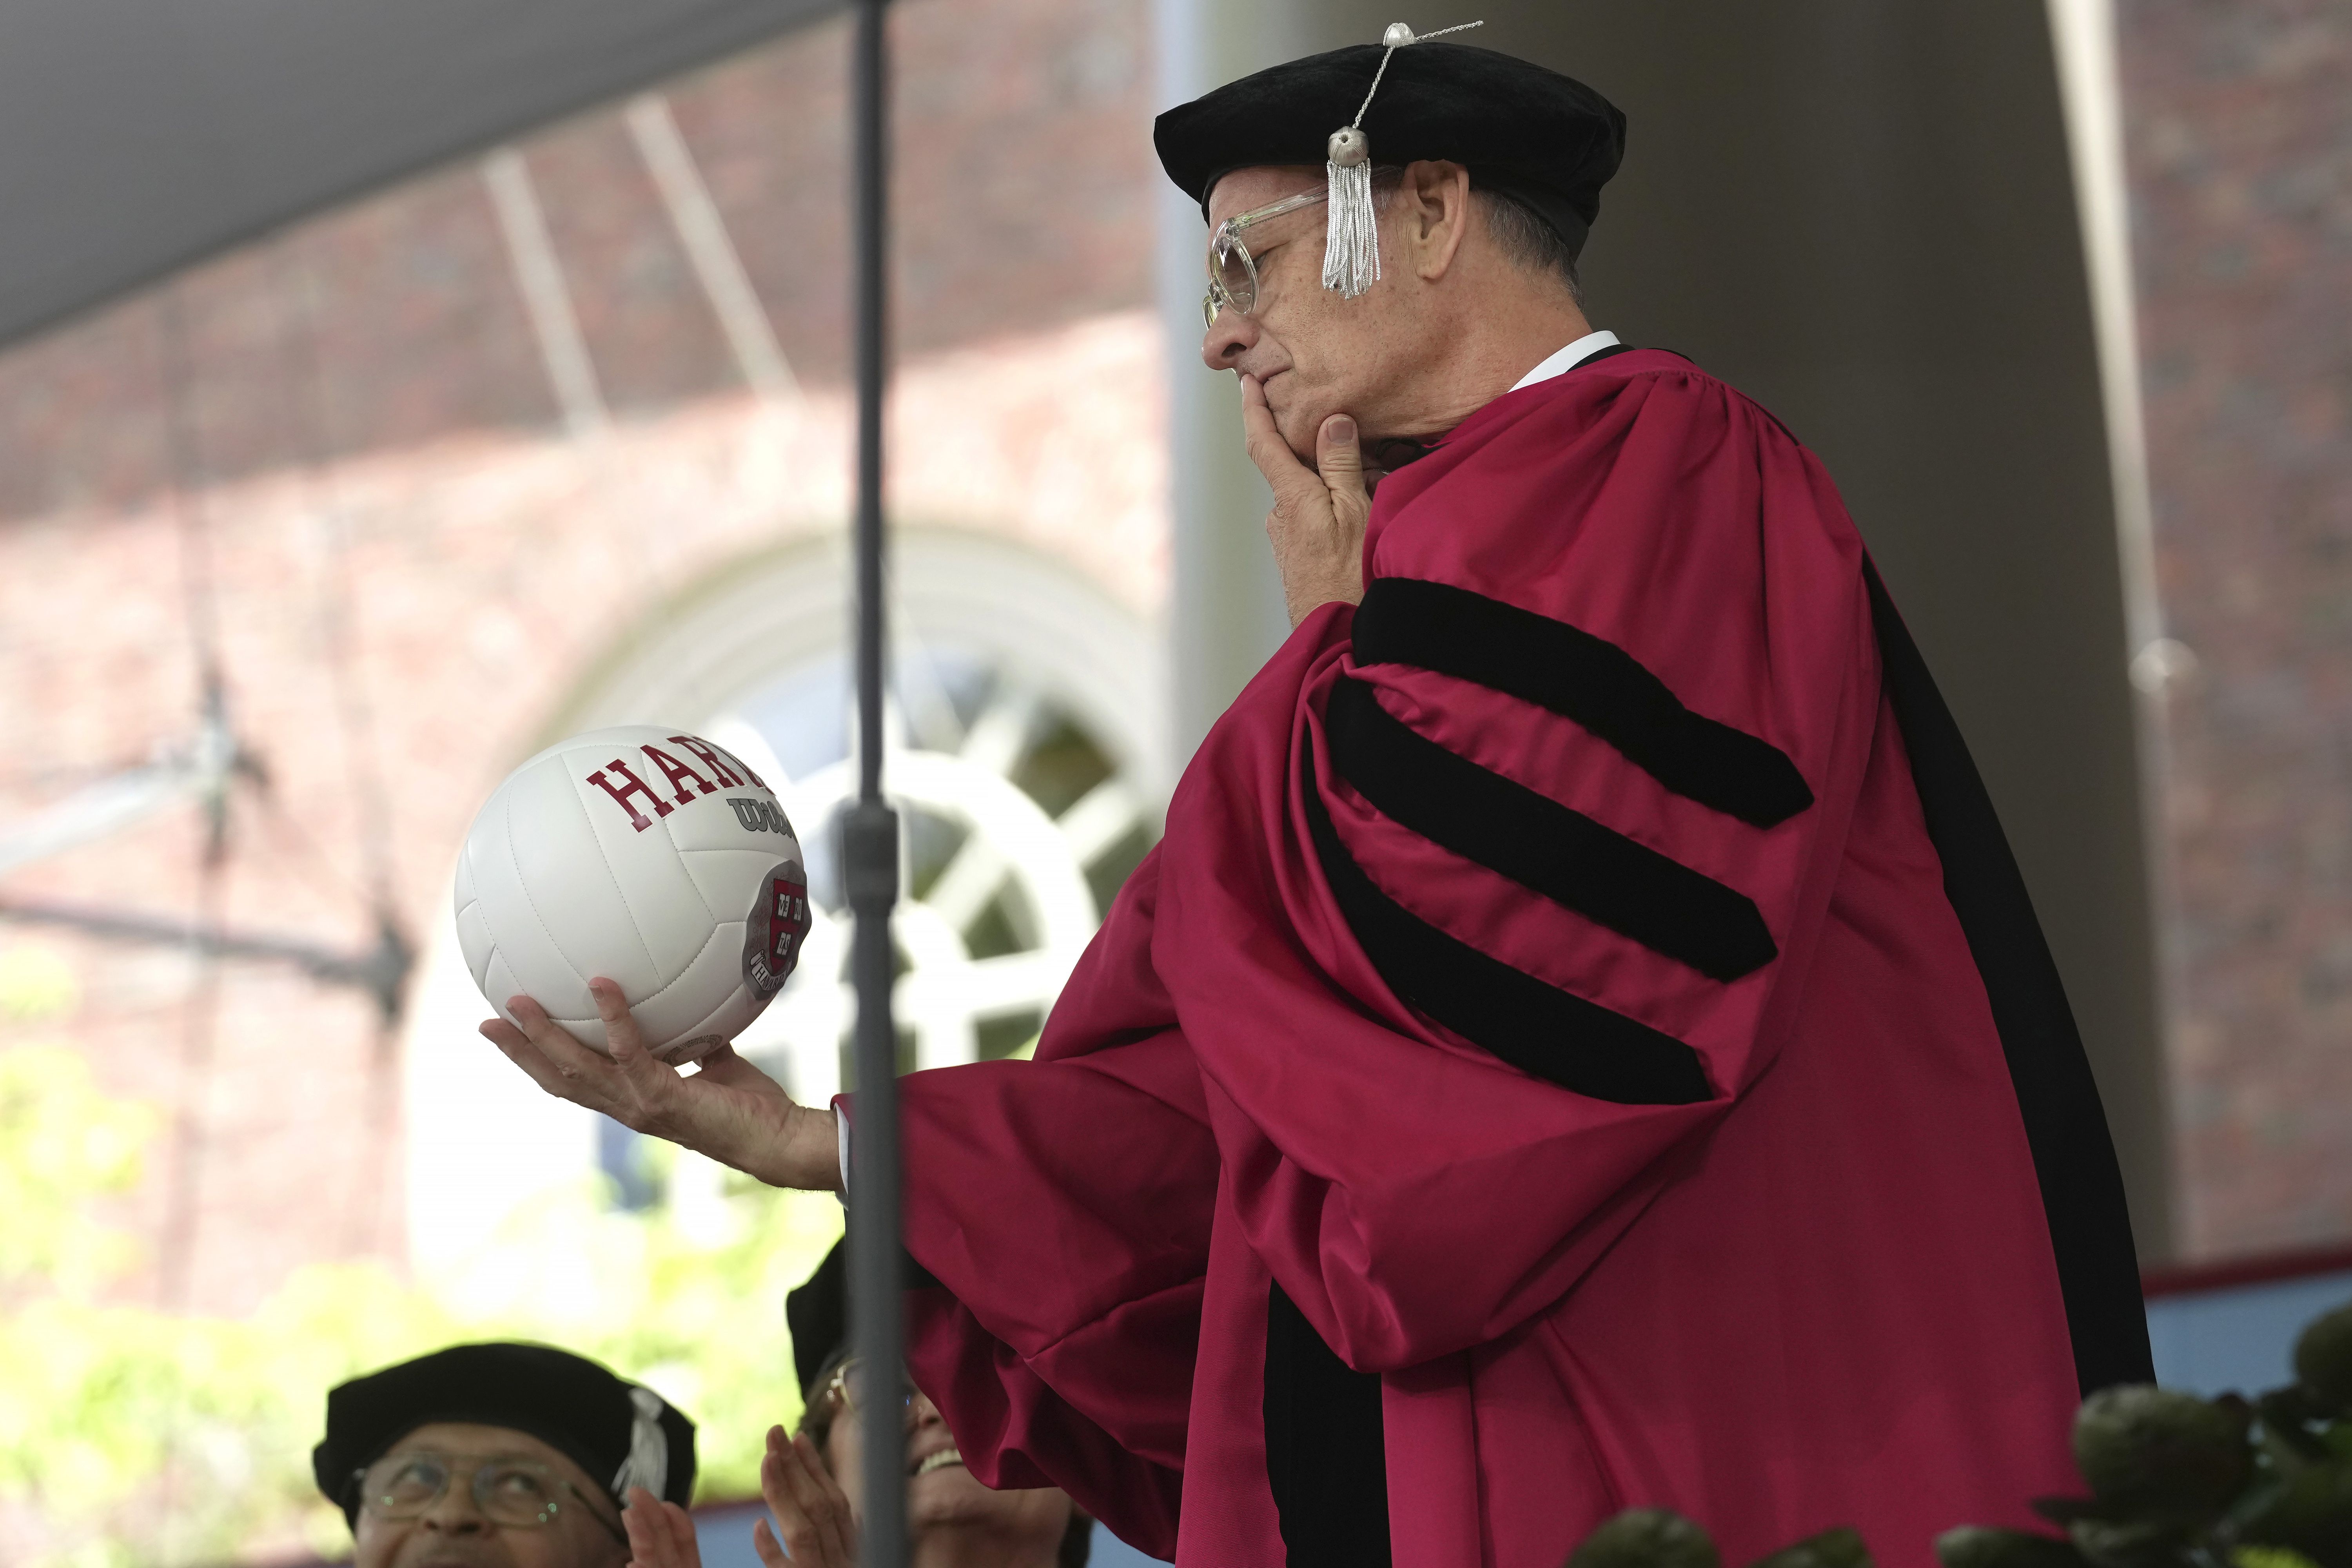 Actor Tom Hanks examines a ball as part of a spoof during Harvard University commencement exercises on the school's campus.